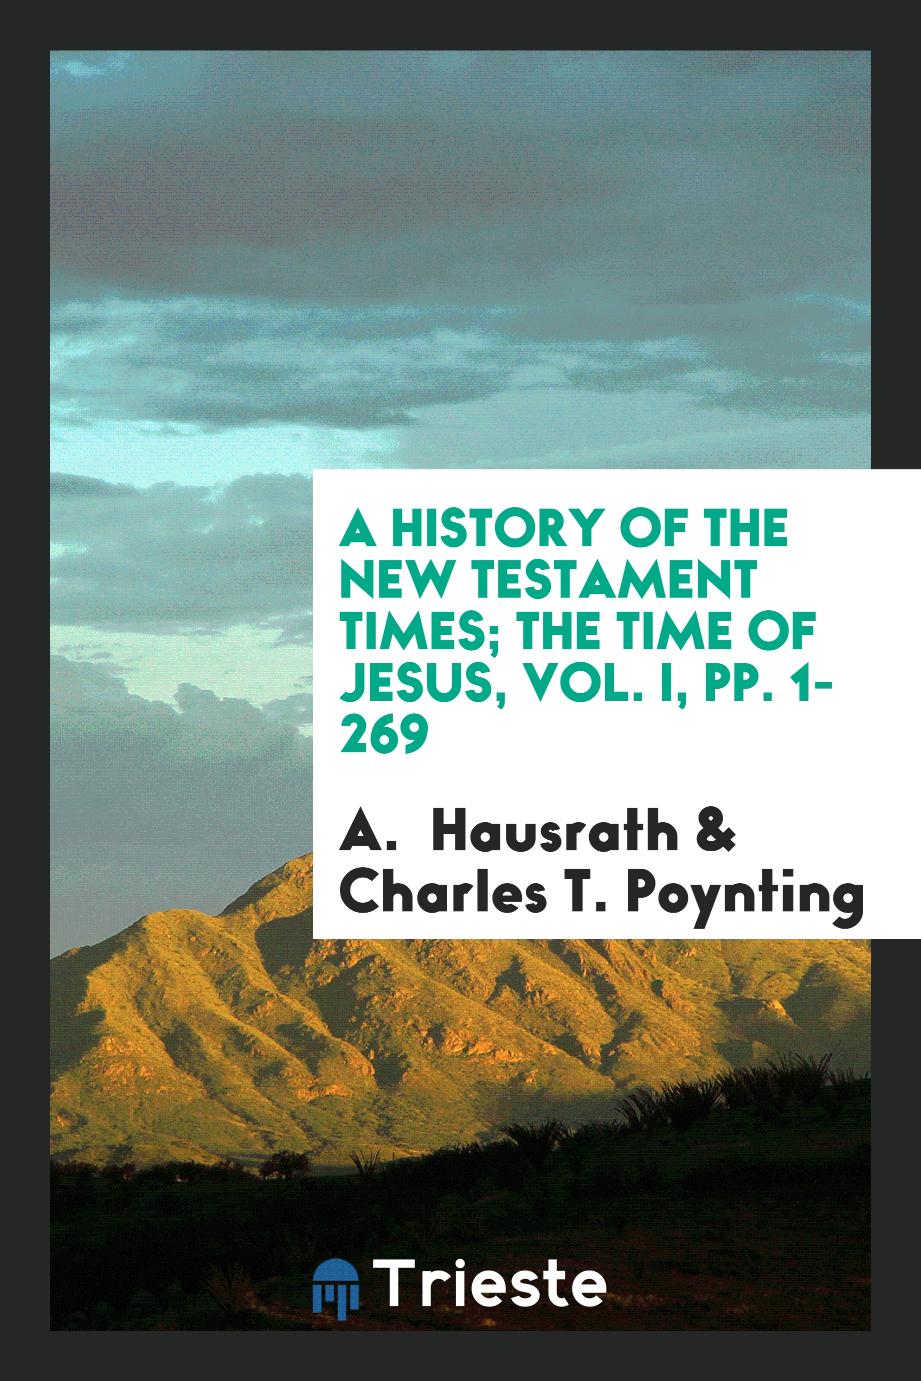 A History of the New Testament Times; The Time of Jesus, Vol. I, pp. 1-269